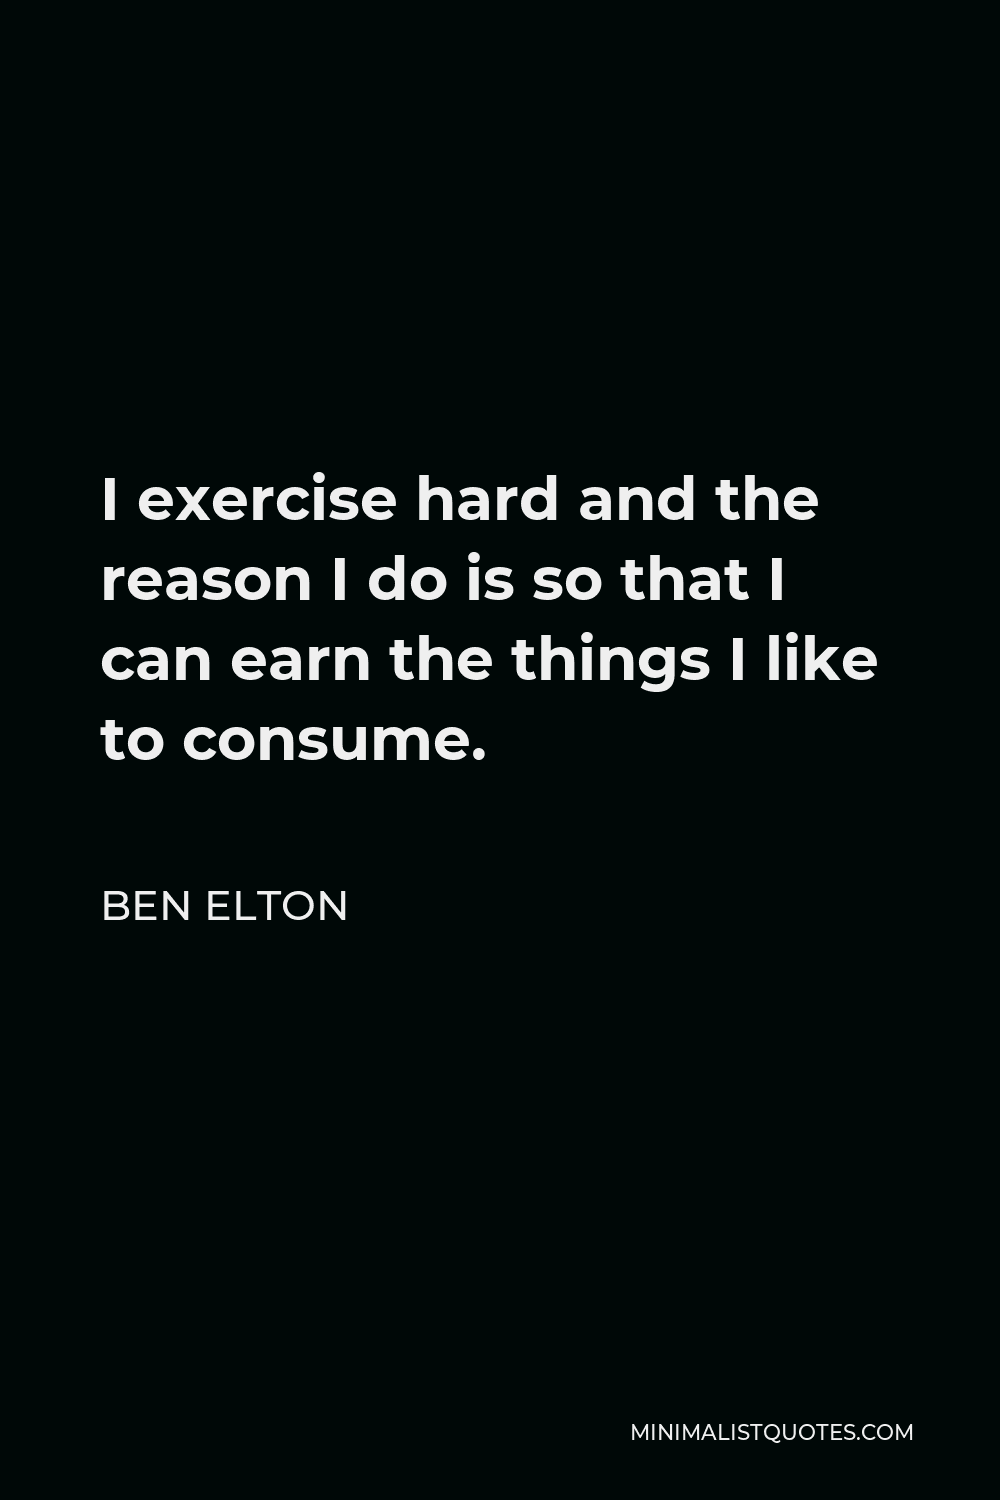 Ben Elton Quote - I exercise hard and the reason I do is so that I can earn the things I like to consume.